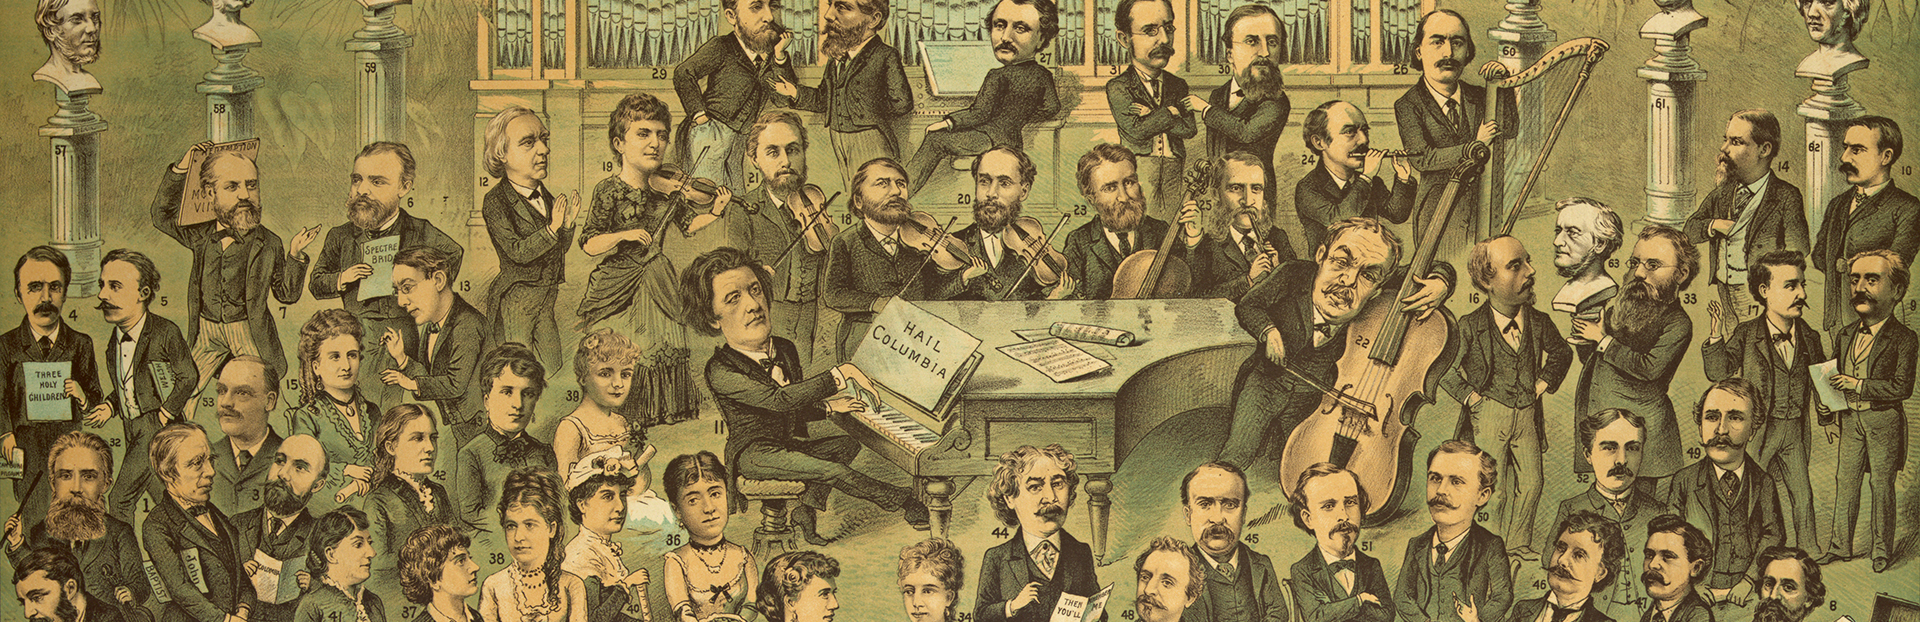 Detail of 1888 print: Our National Music depicting composers, conductors, and musicians